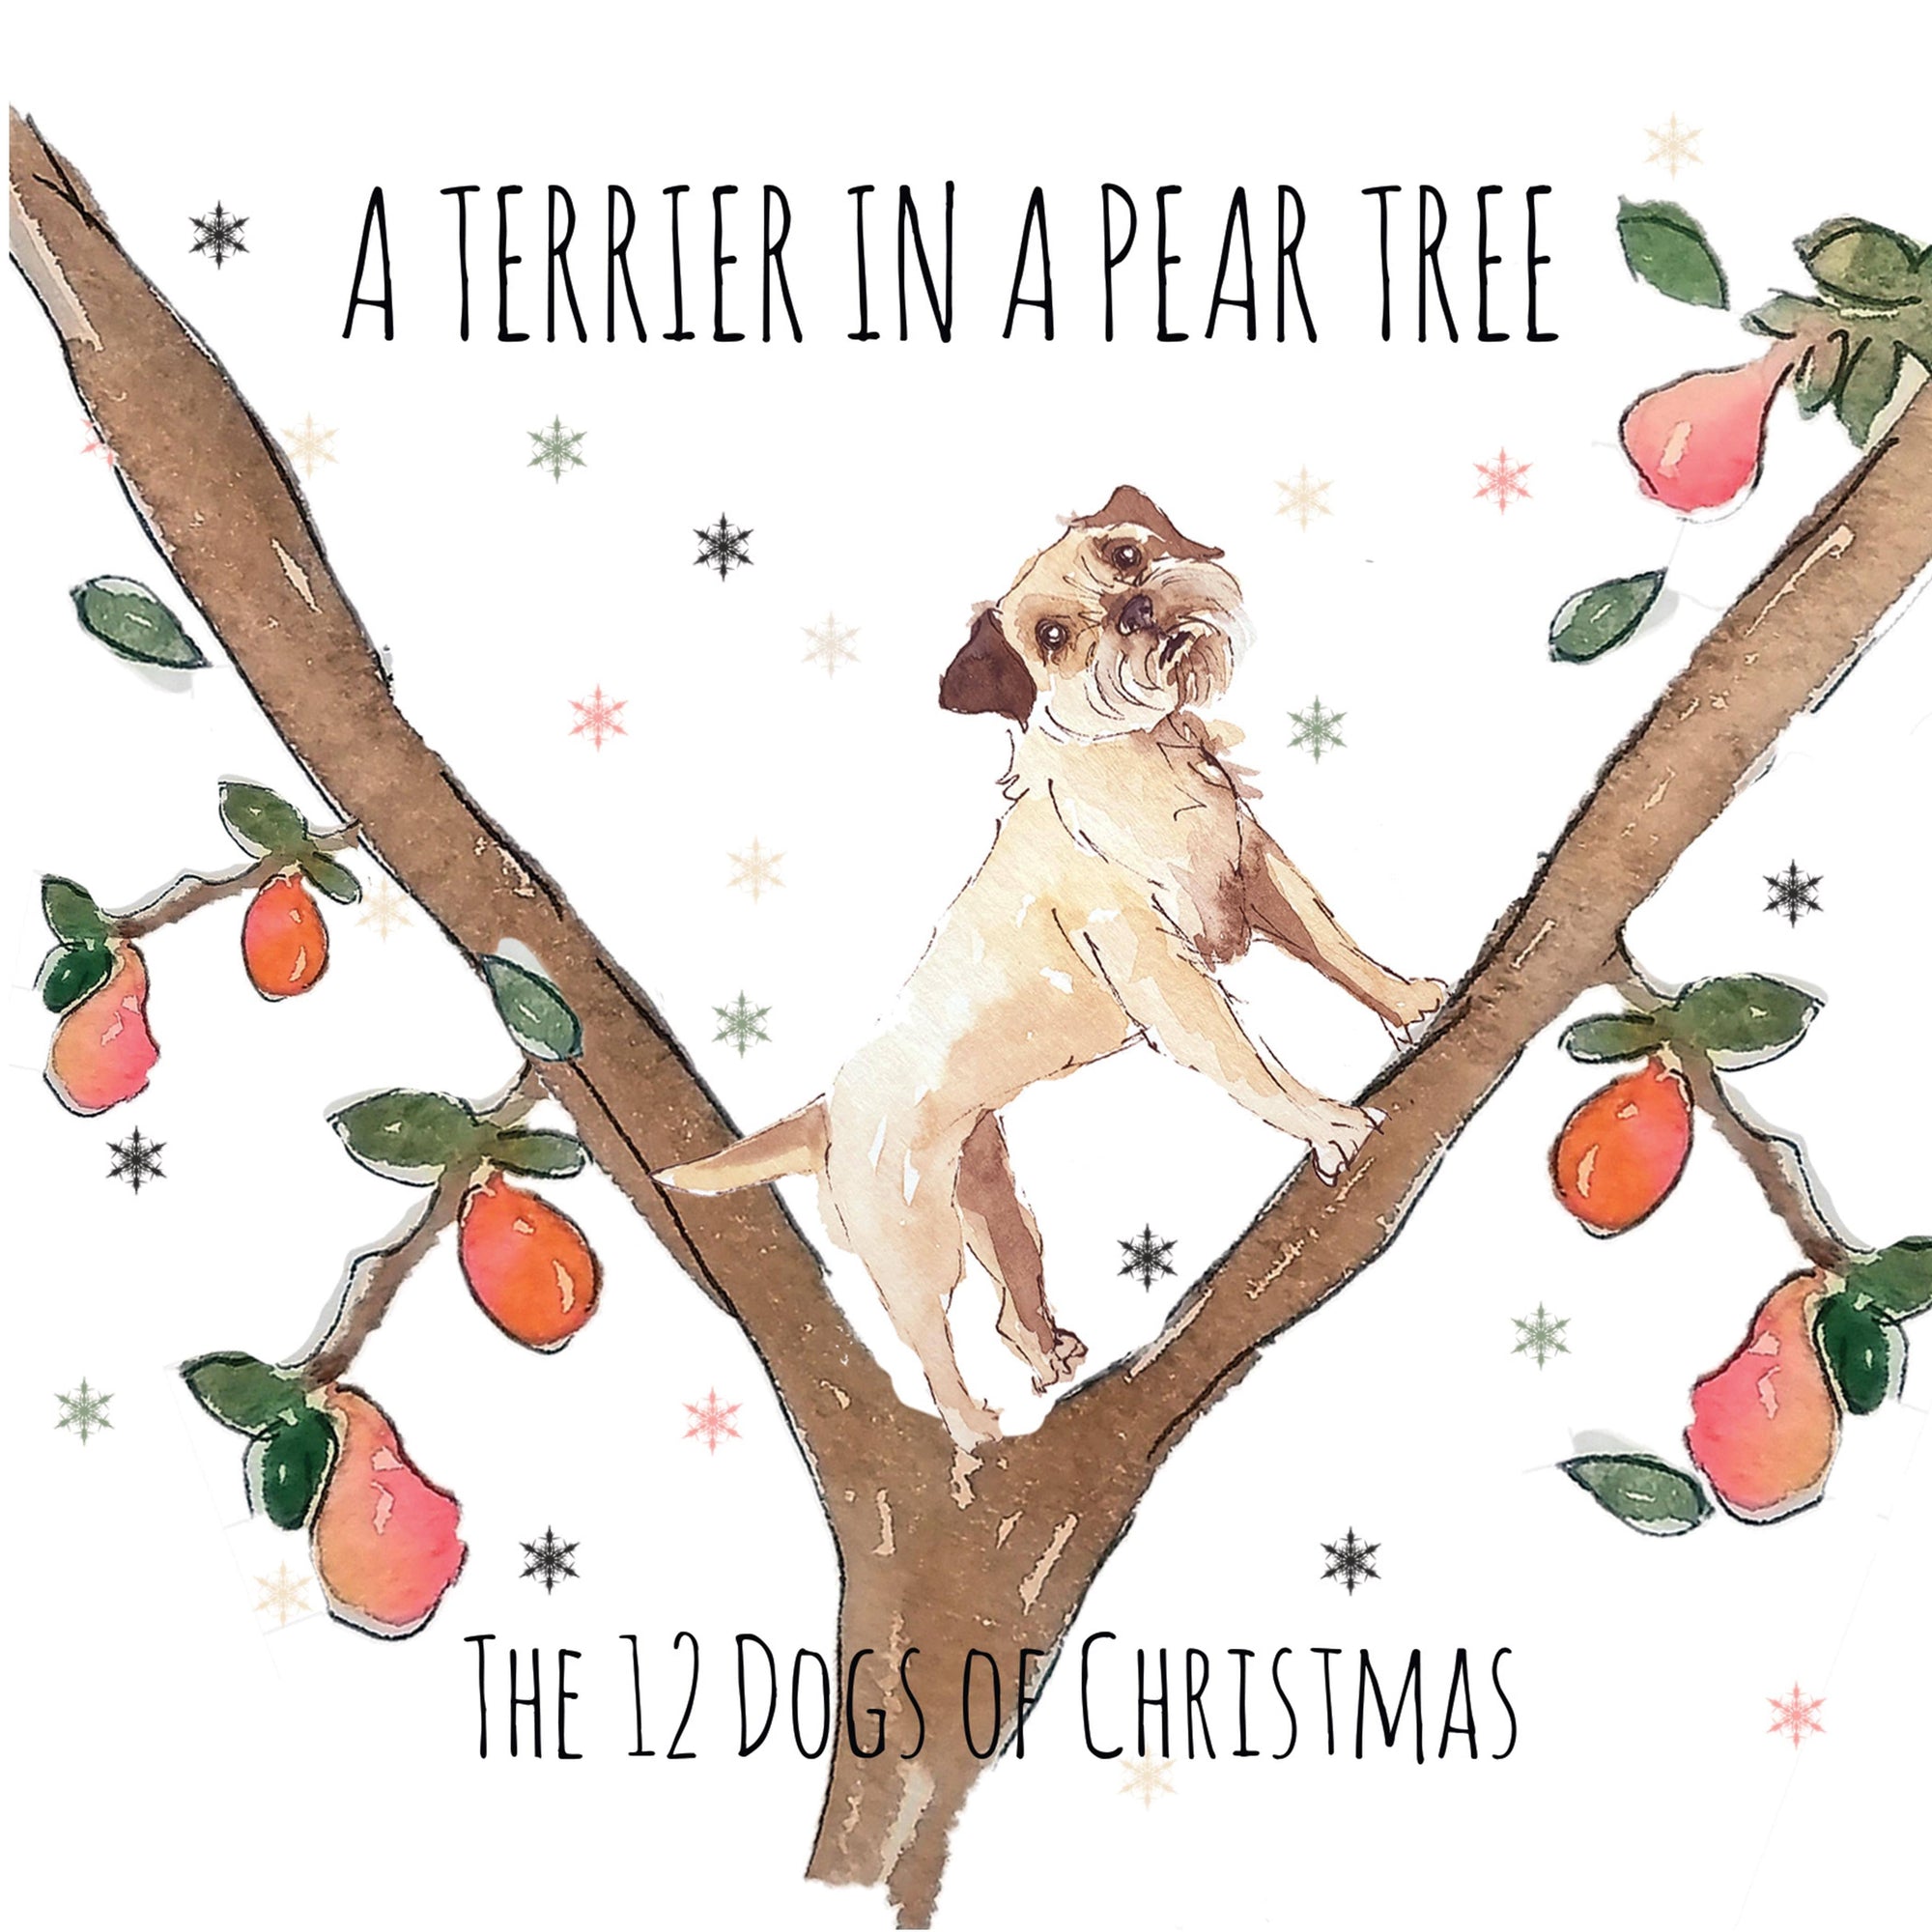 A Terrier in a Pear Tree Christmas Card